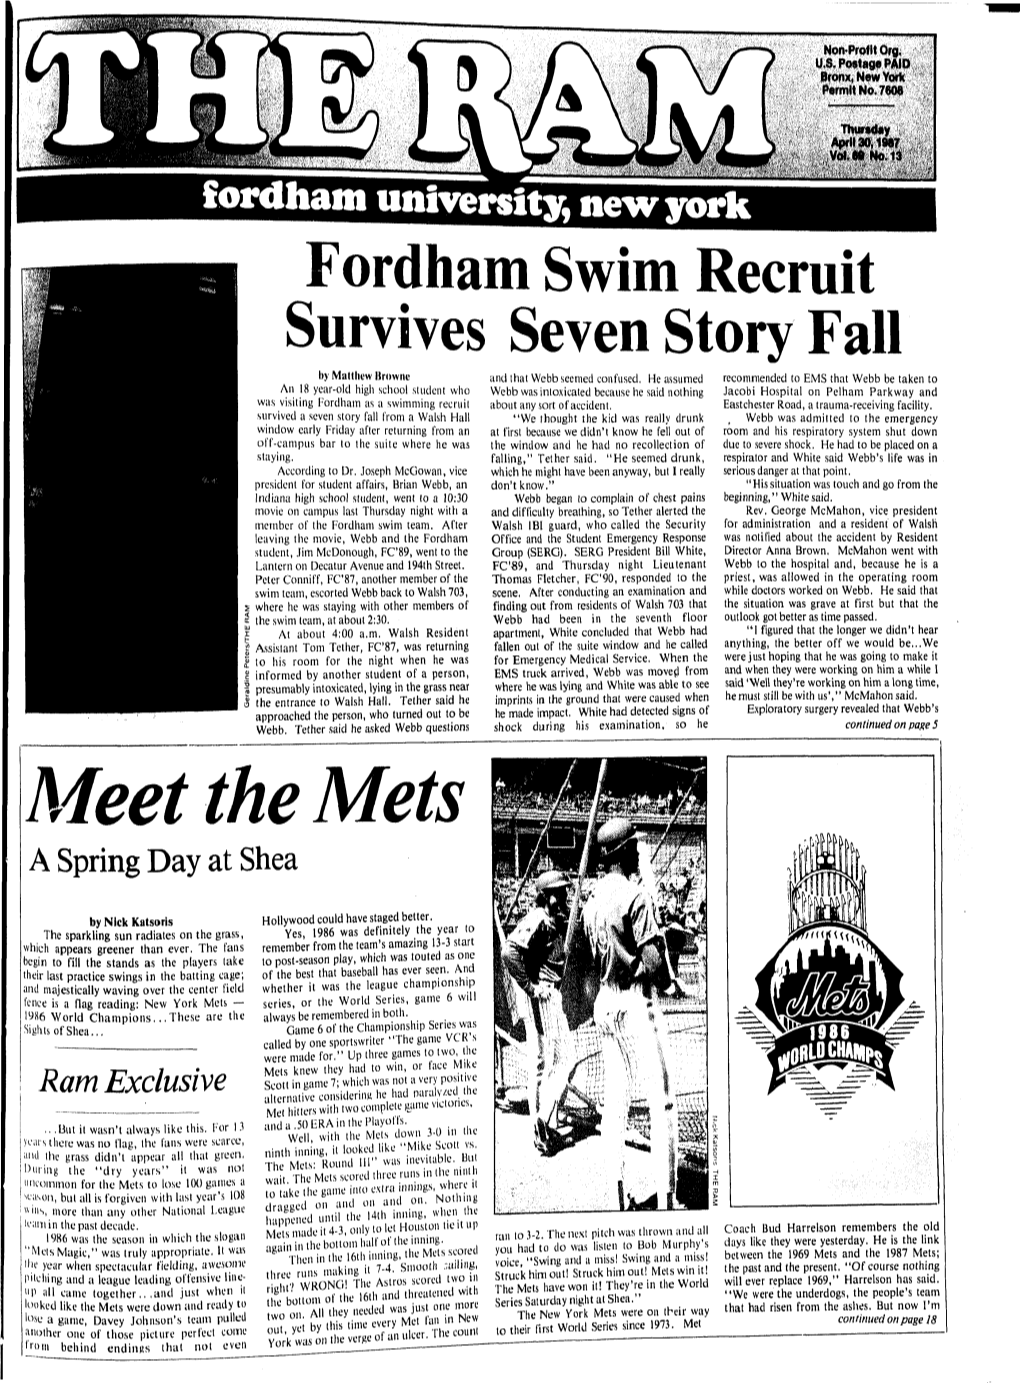 Fordham Swim Recruit Survives Seven Story Fall by Matthew Browne and That Webb Seemed Confused